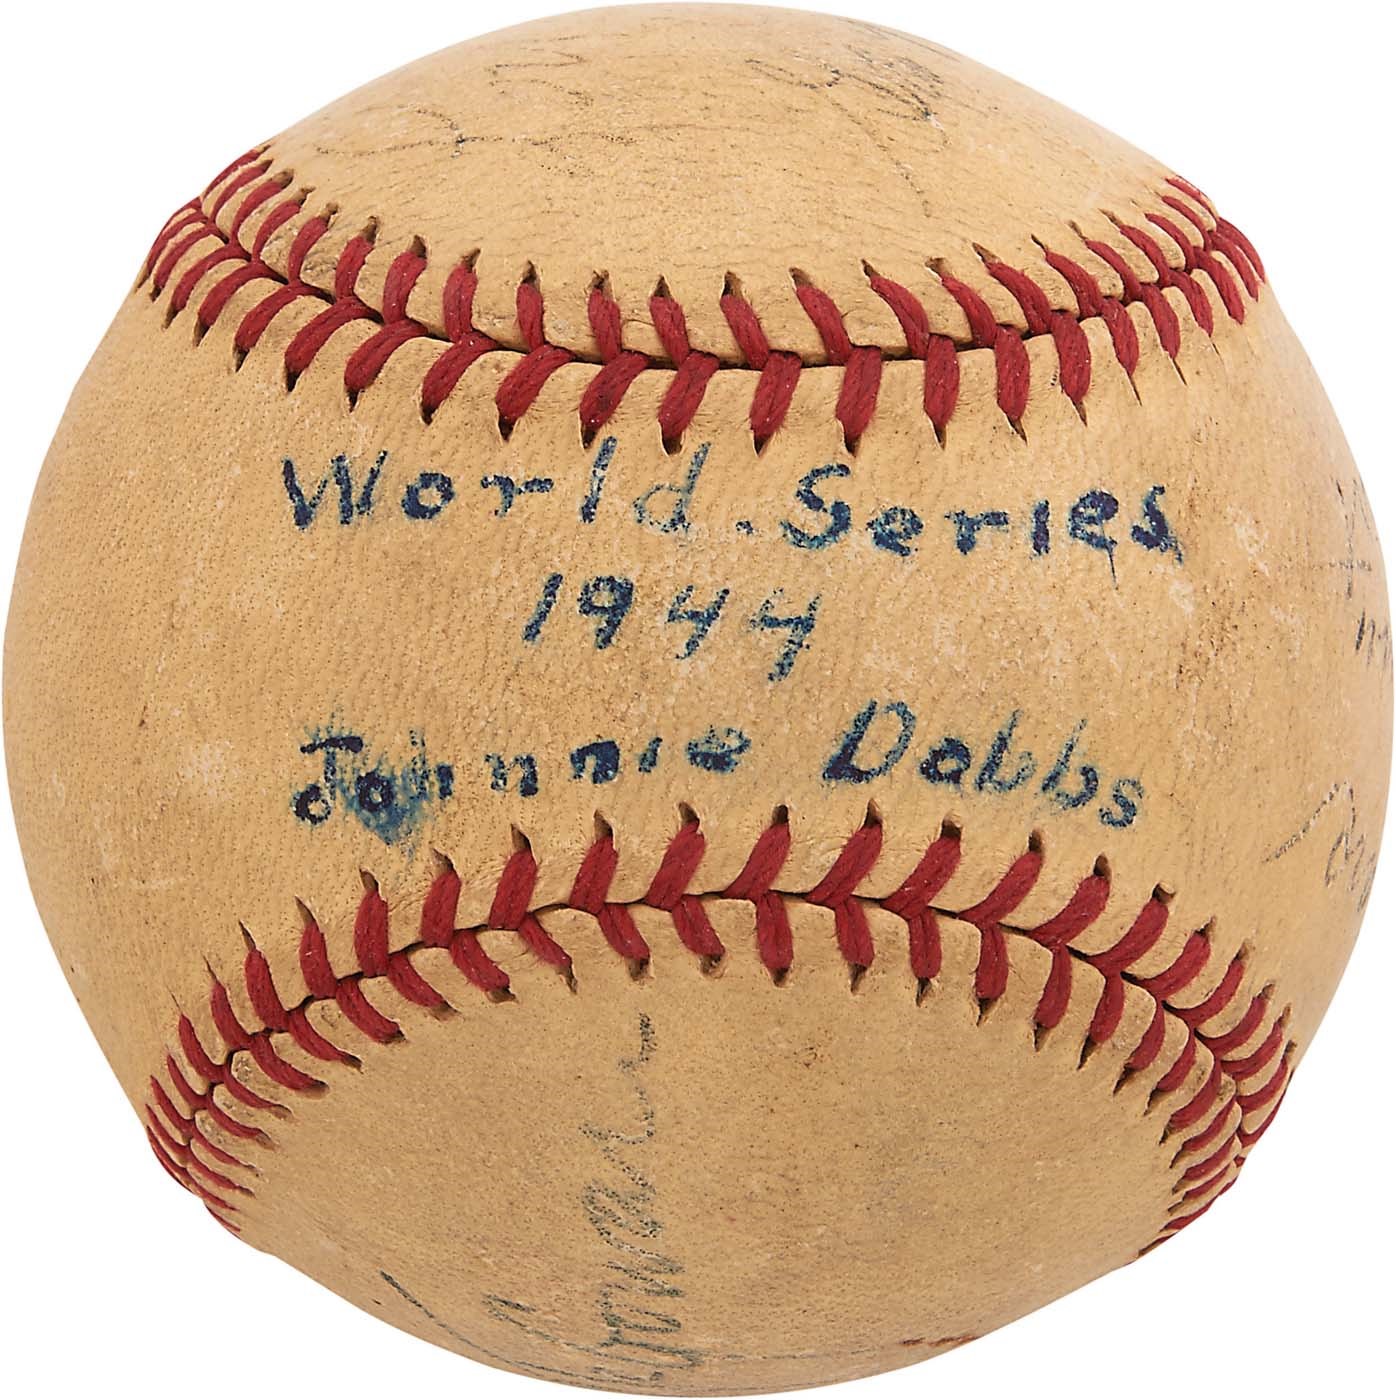 St. Louis Cardinals - 1944 World Series Game Used Baseball Signed by Umpire Crew w/Bill McGowan (PSA)